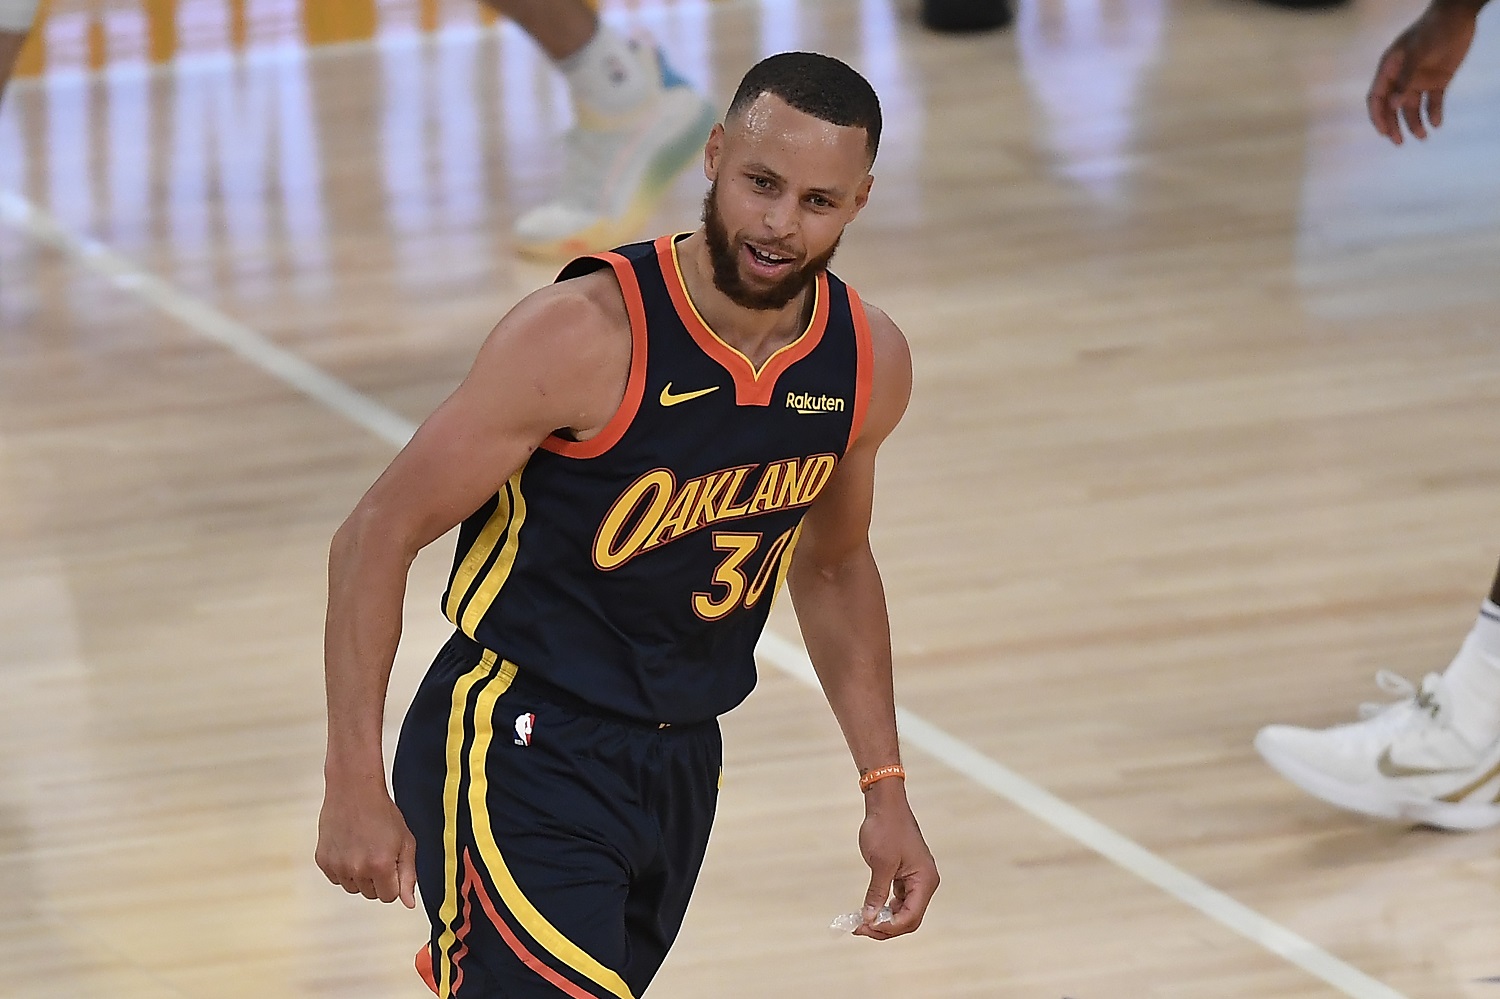 Stephen Curry of the Golden State Warriors reacts after hitting a 3-pointer against the Los Angeles Lakers on May 19, 2021.